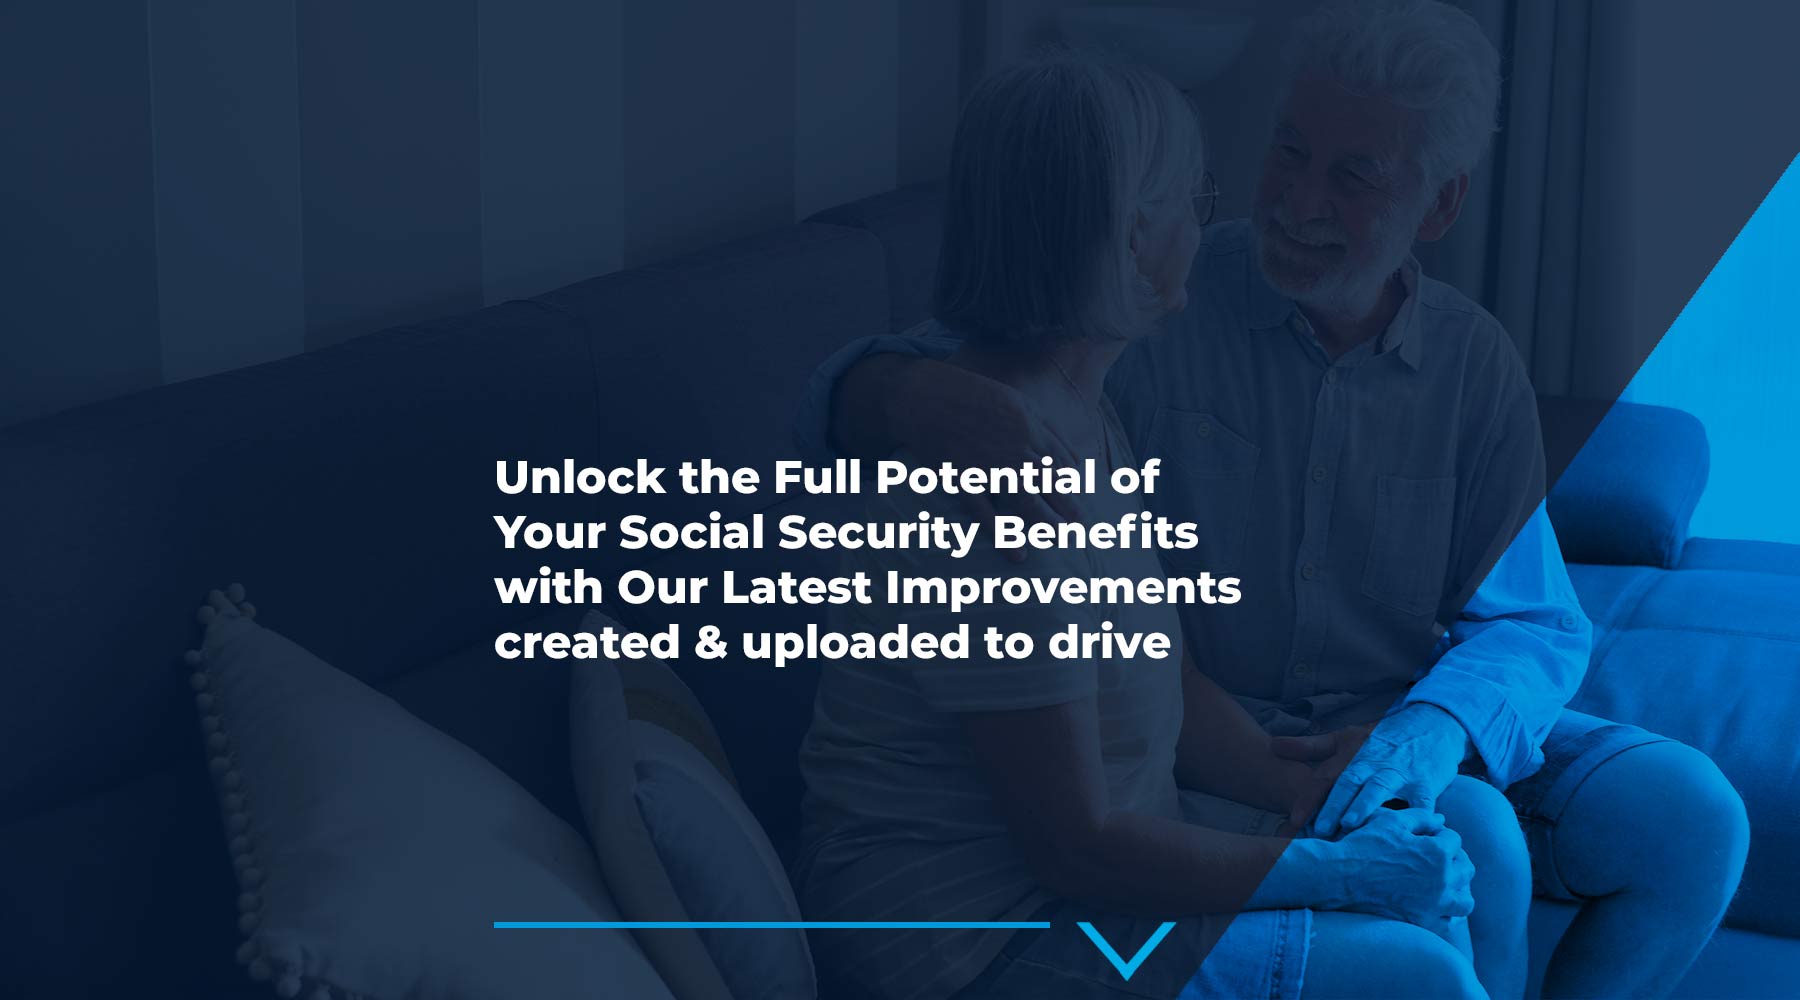 Unlock the Full Potential of Your Social Security Benefits with Our Latest Improvements